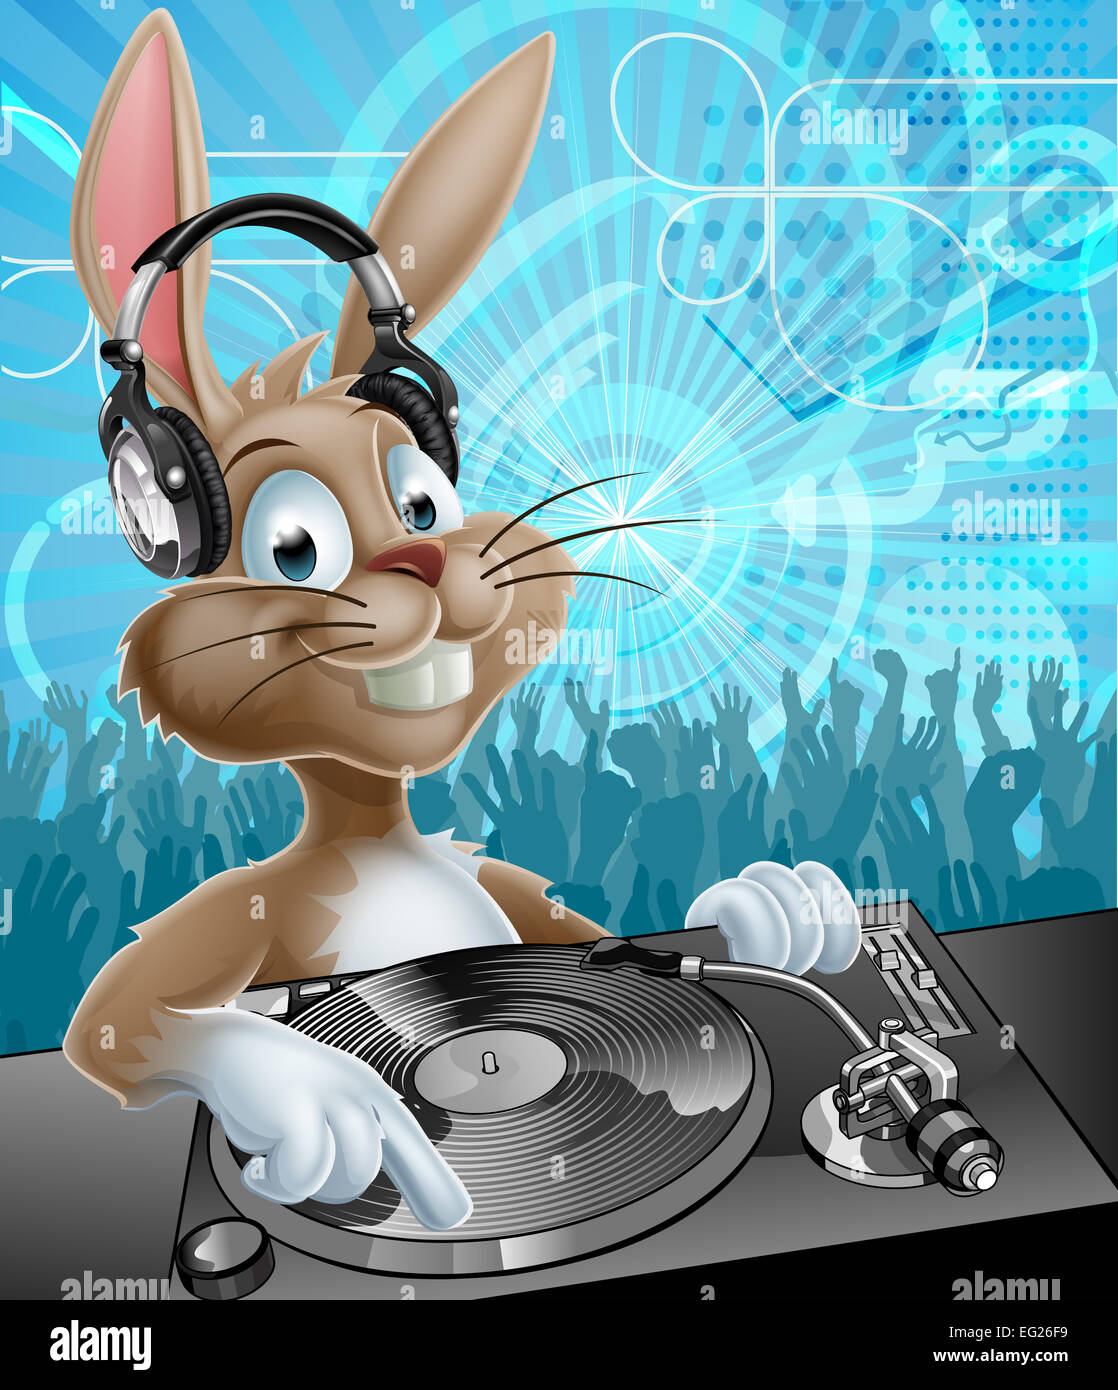 A cartoon Easter Bunny DJ with headphones on at the record decks with party dancing crowd in the background Stock Photo